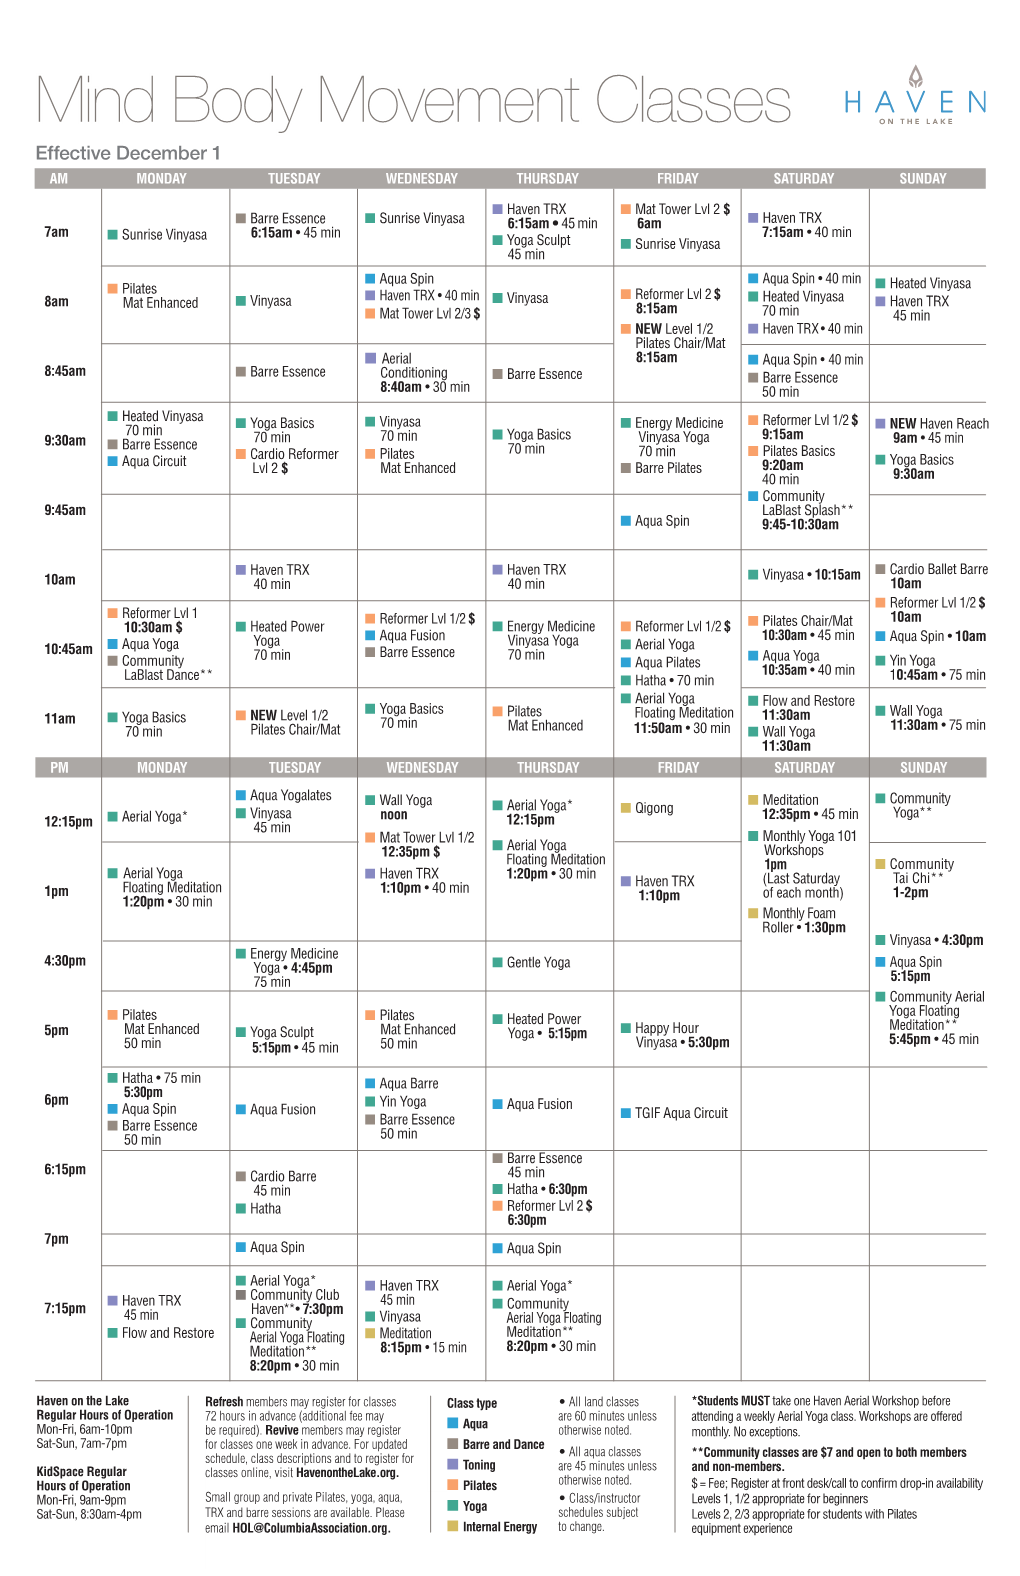 Haven on the Lake Mind Body Movement Class Schedule For